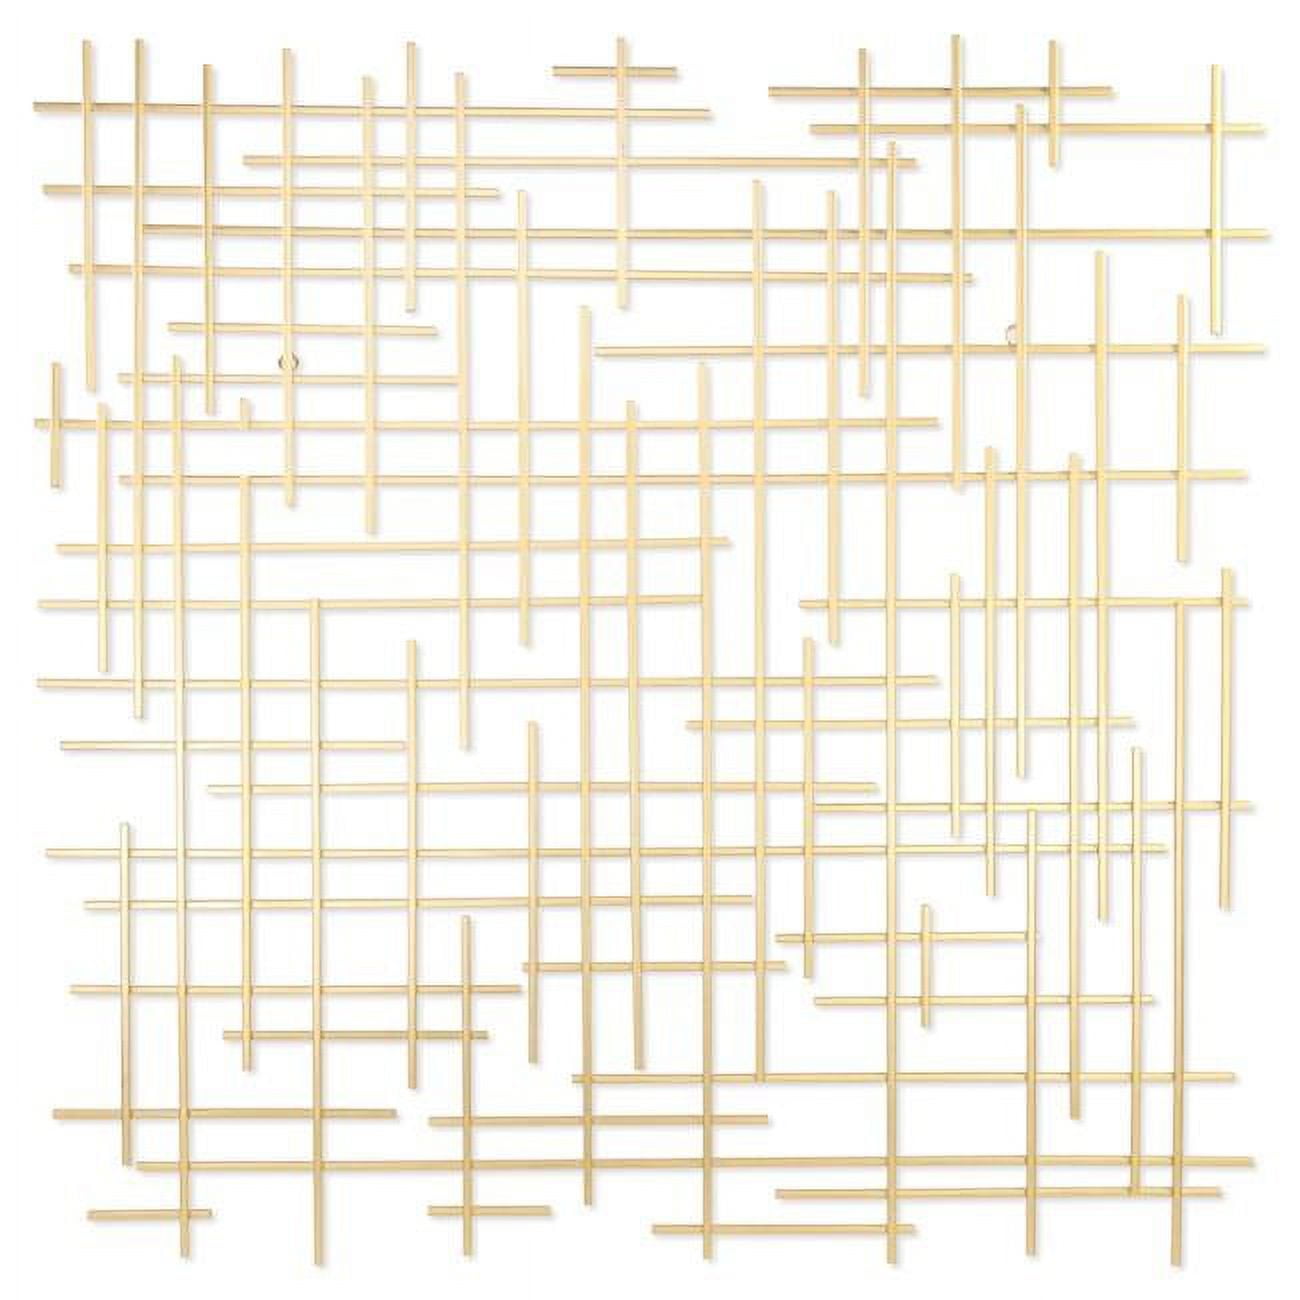 Picture of Cheungs 5802GD Iquara Square Metal Wall Art, Gold - Large